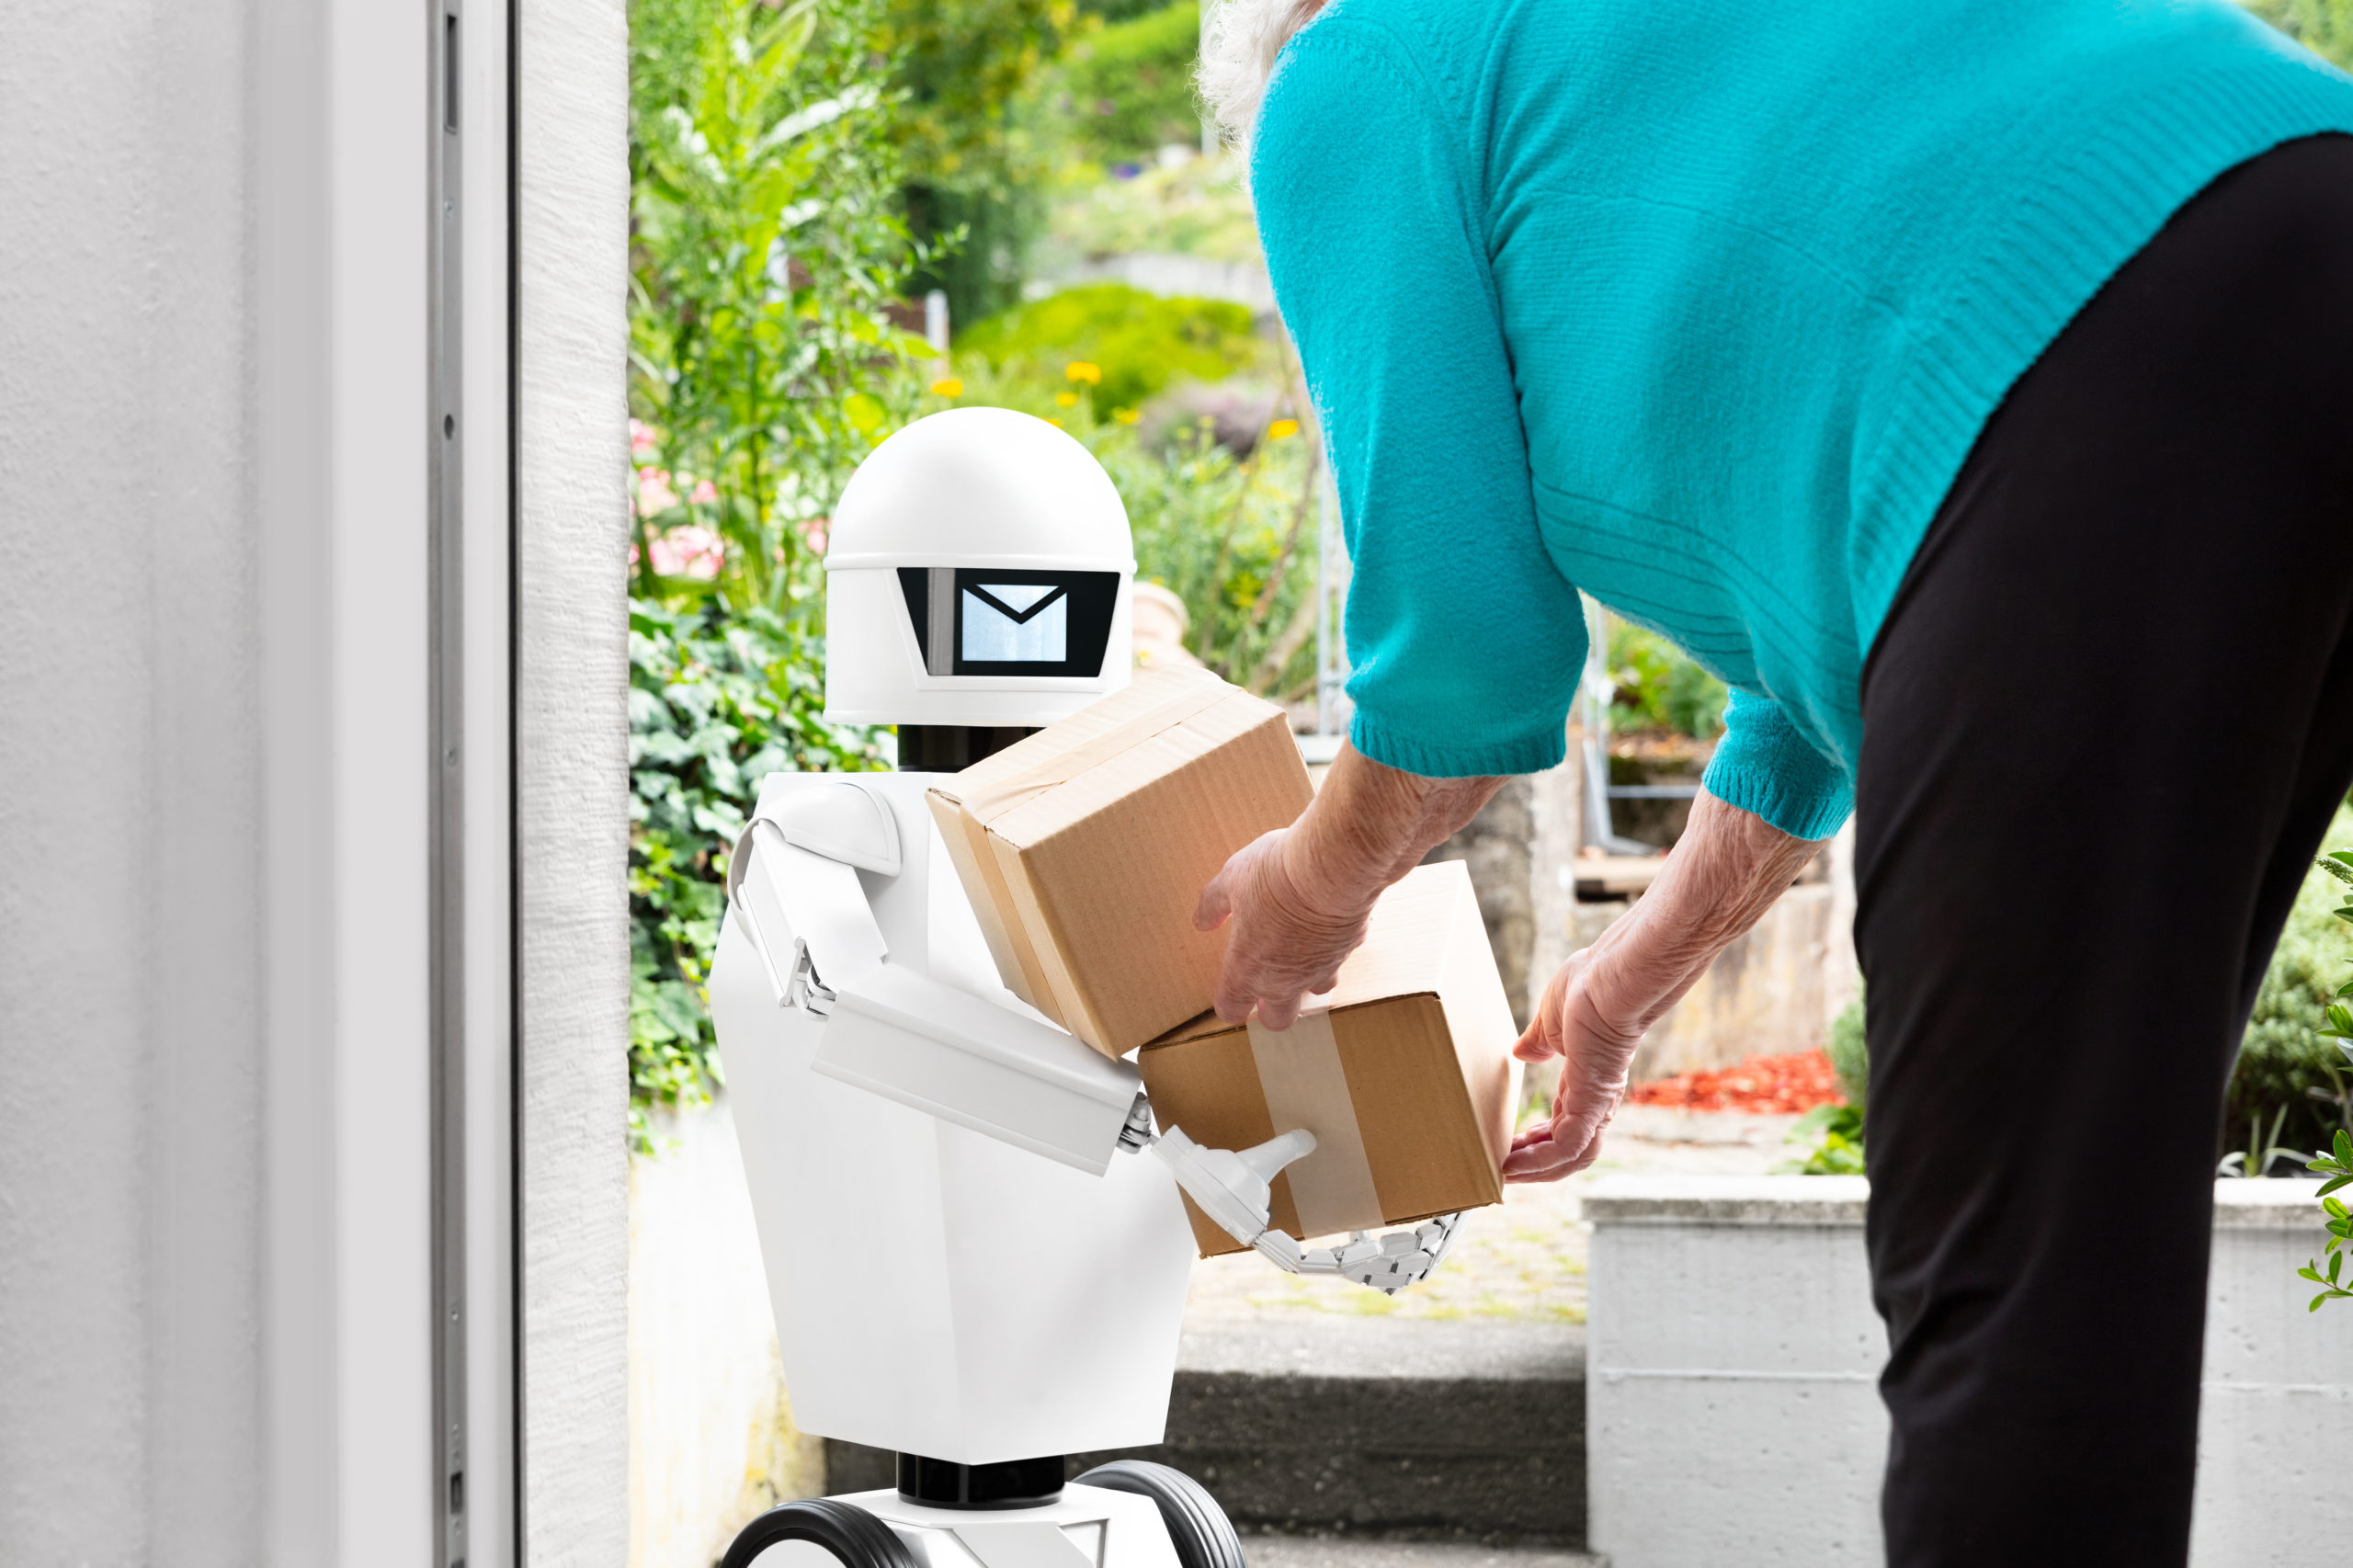 How are delivery robots changing the future?